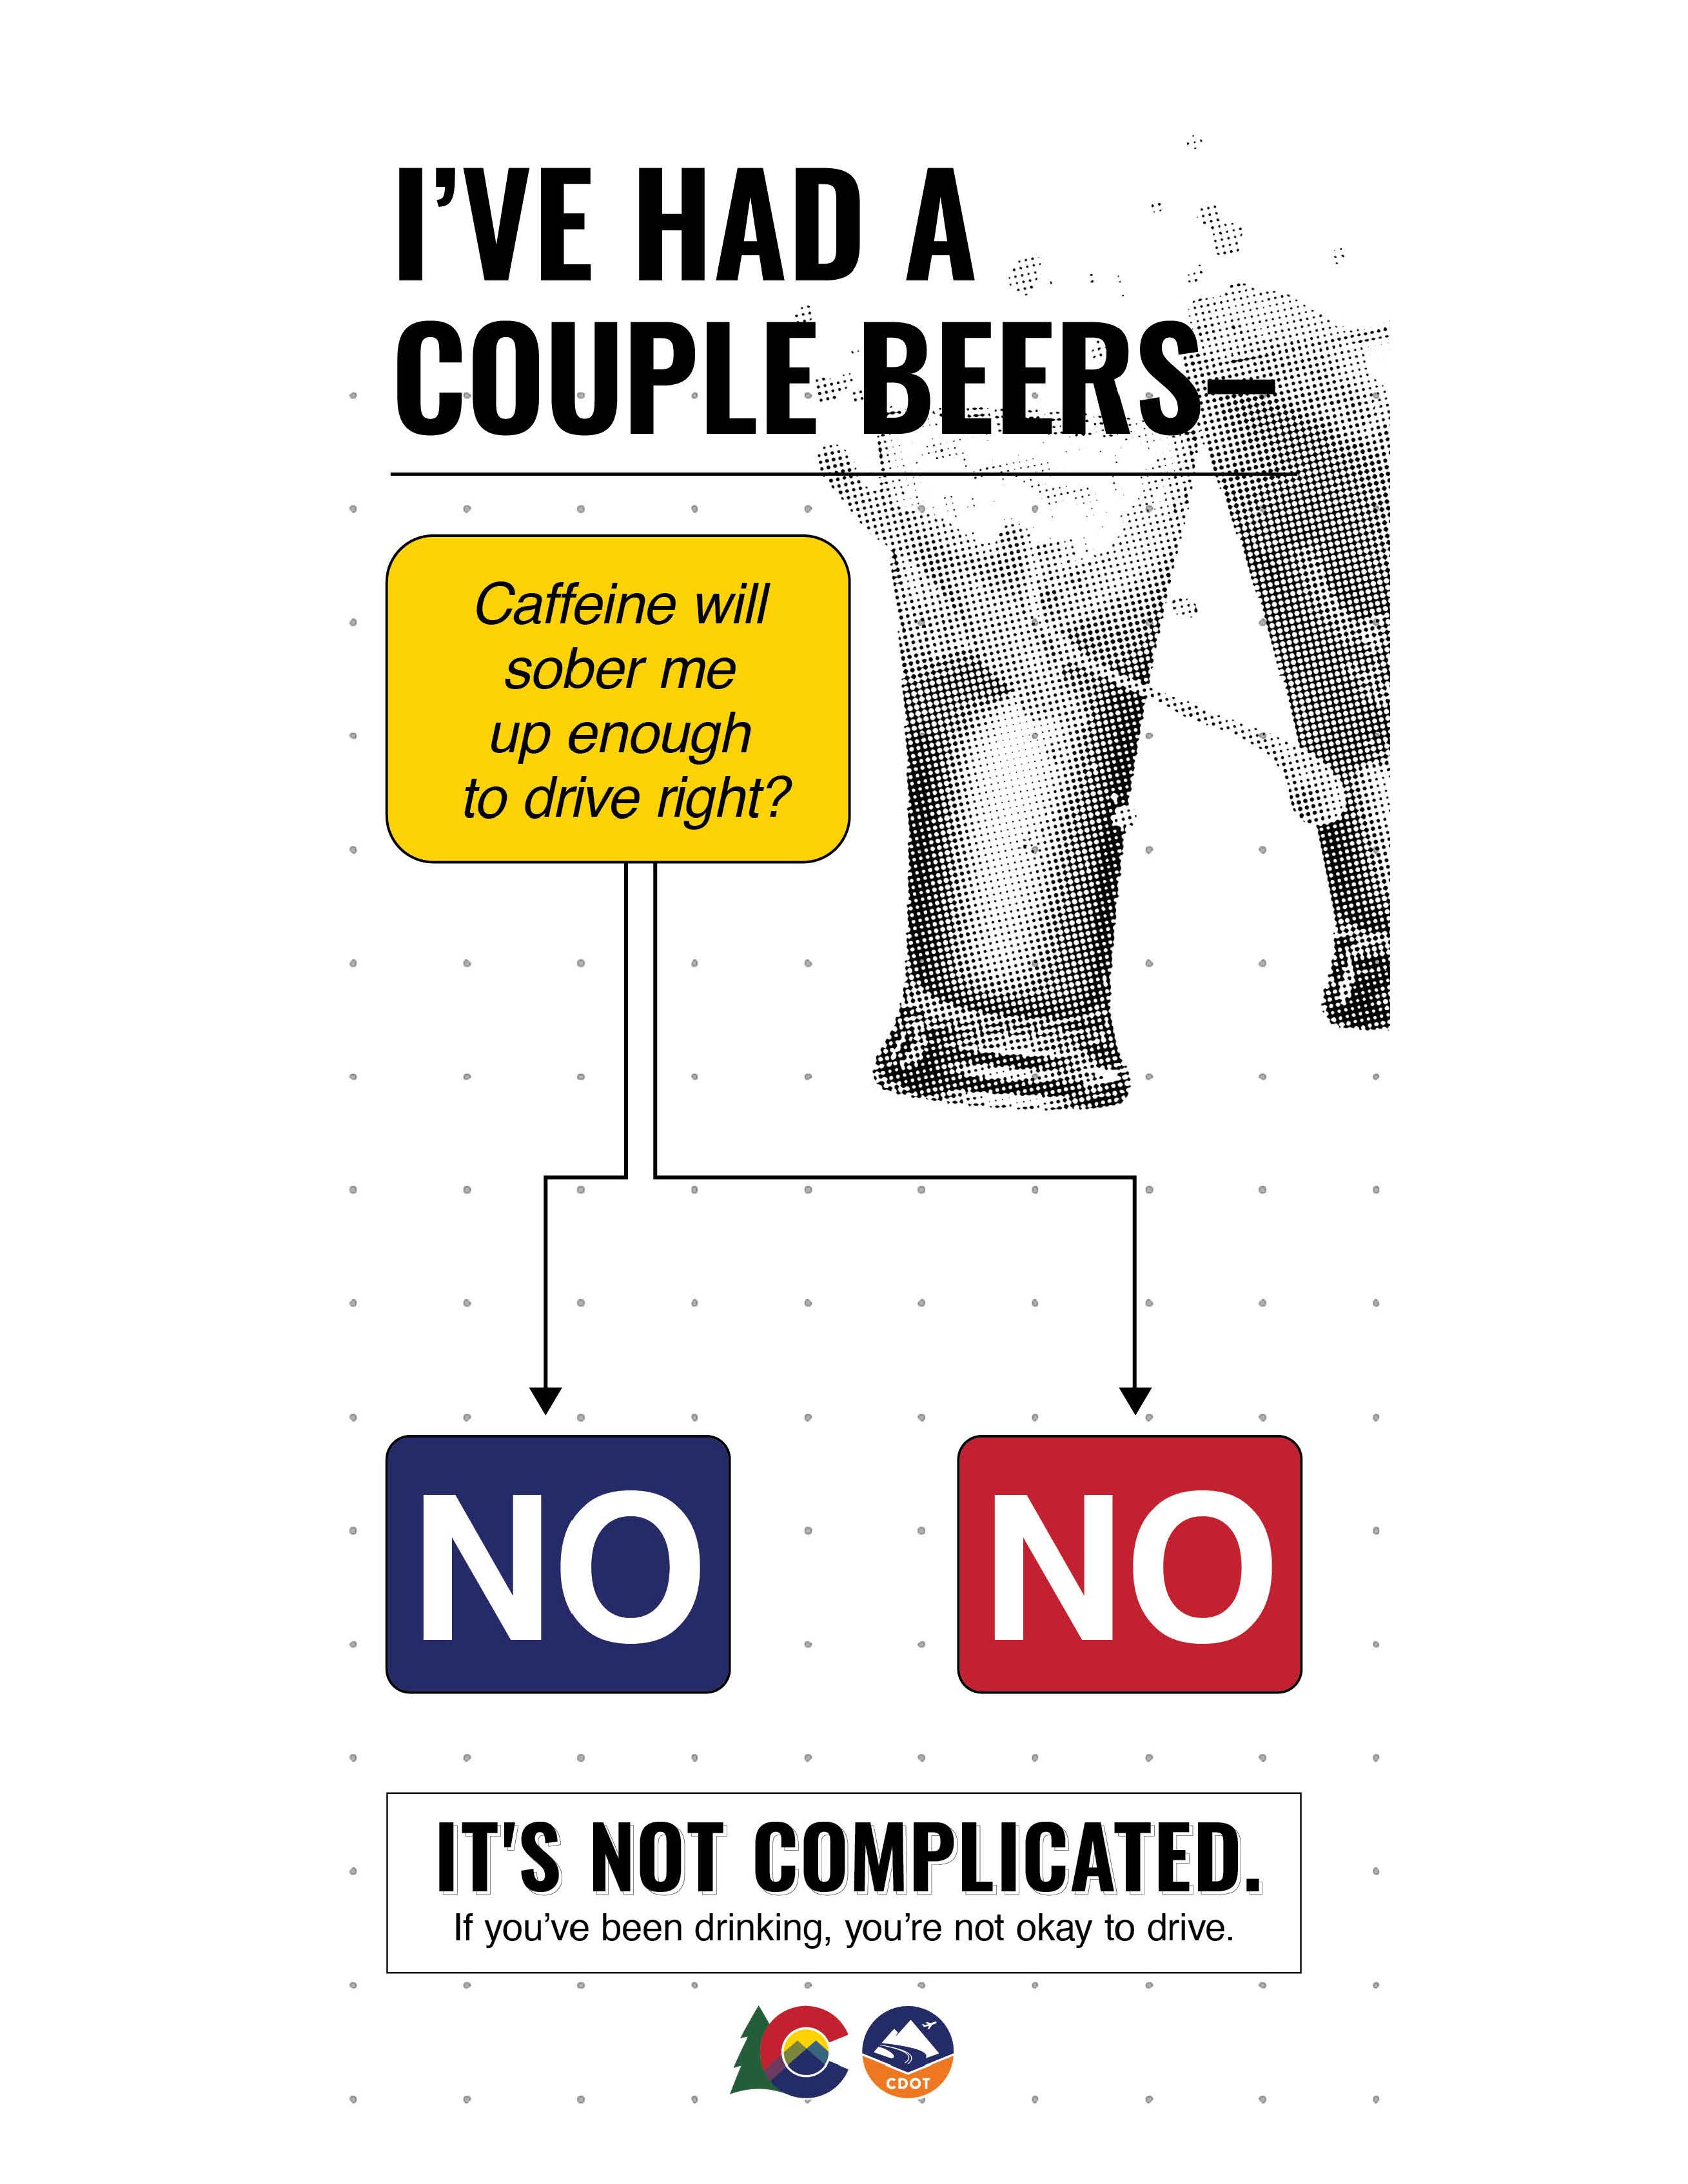 10126 CDOT DUI Its Not Complicated Couple Beers Standee_v1 20210514.jpg detail image